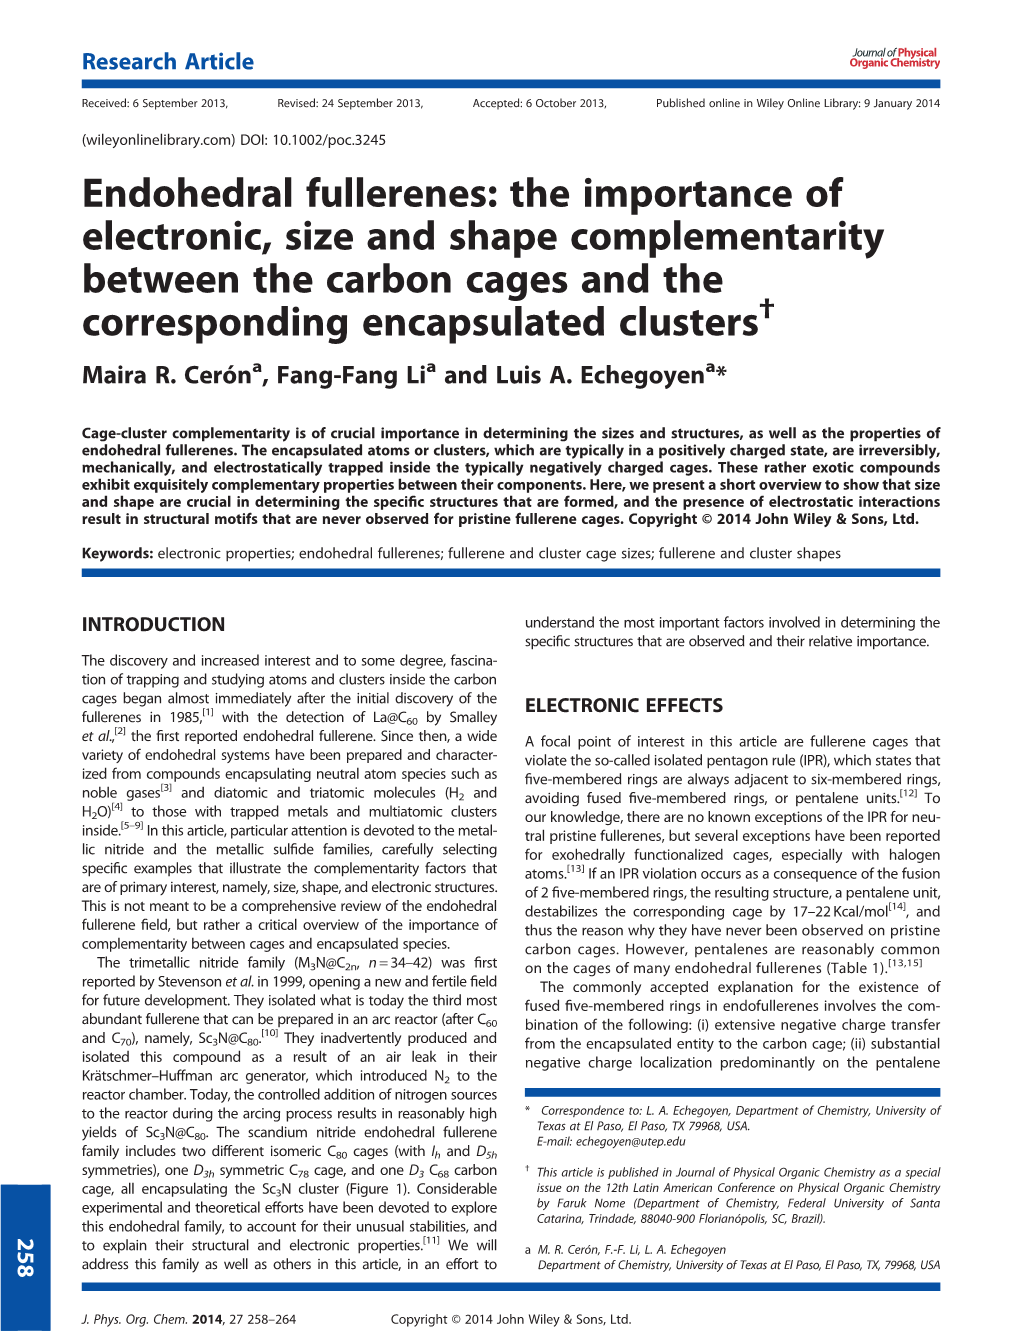 Endohedral Fullerenes: the Importance of Electronic, Size and Shape Complementarity Between the Carbon Cages and the Corresponding Encapsulated Clusters† Maira R